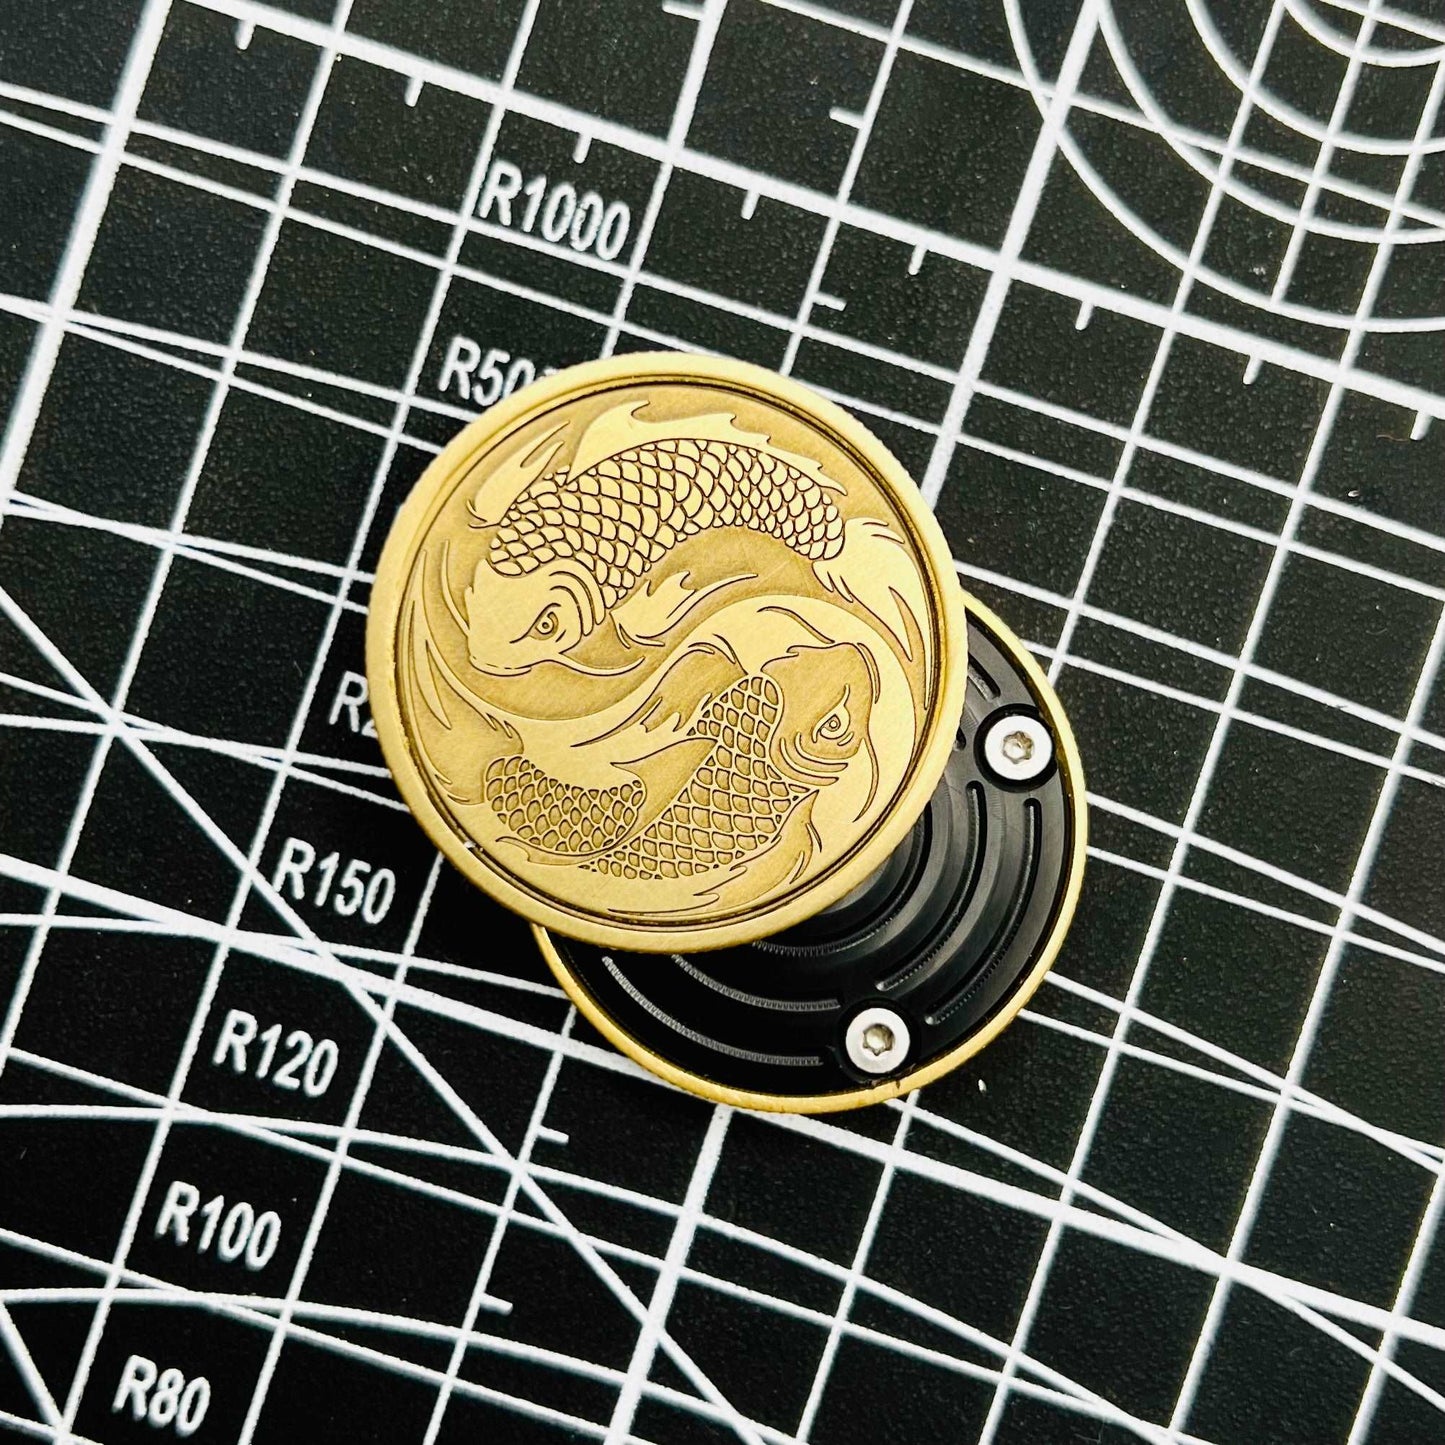 CoinFig - Haptic Modular Magnetic Coin